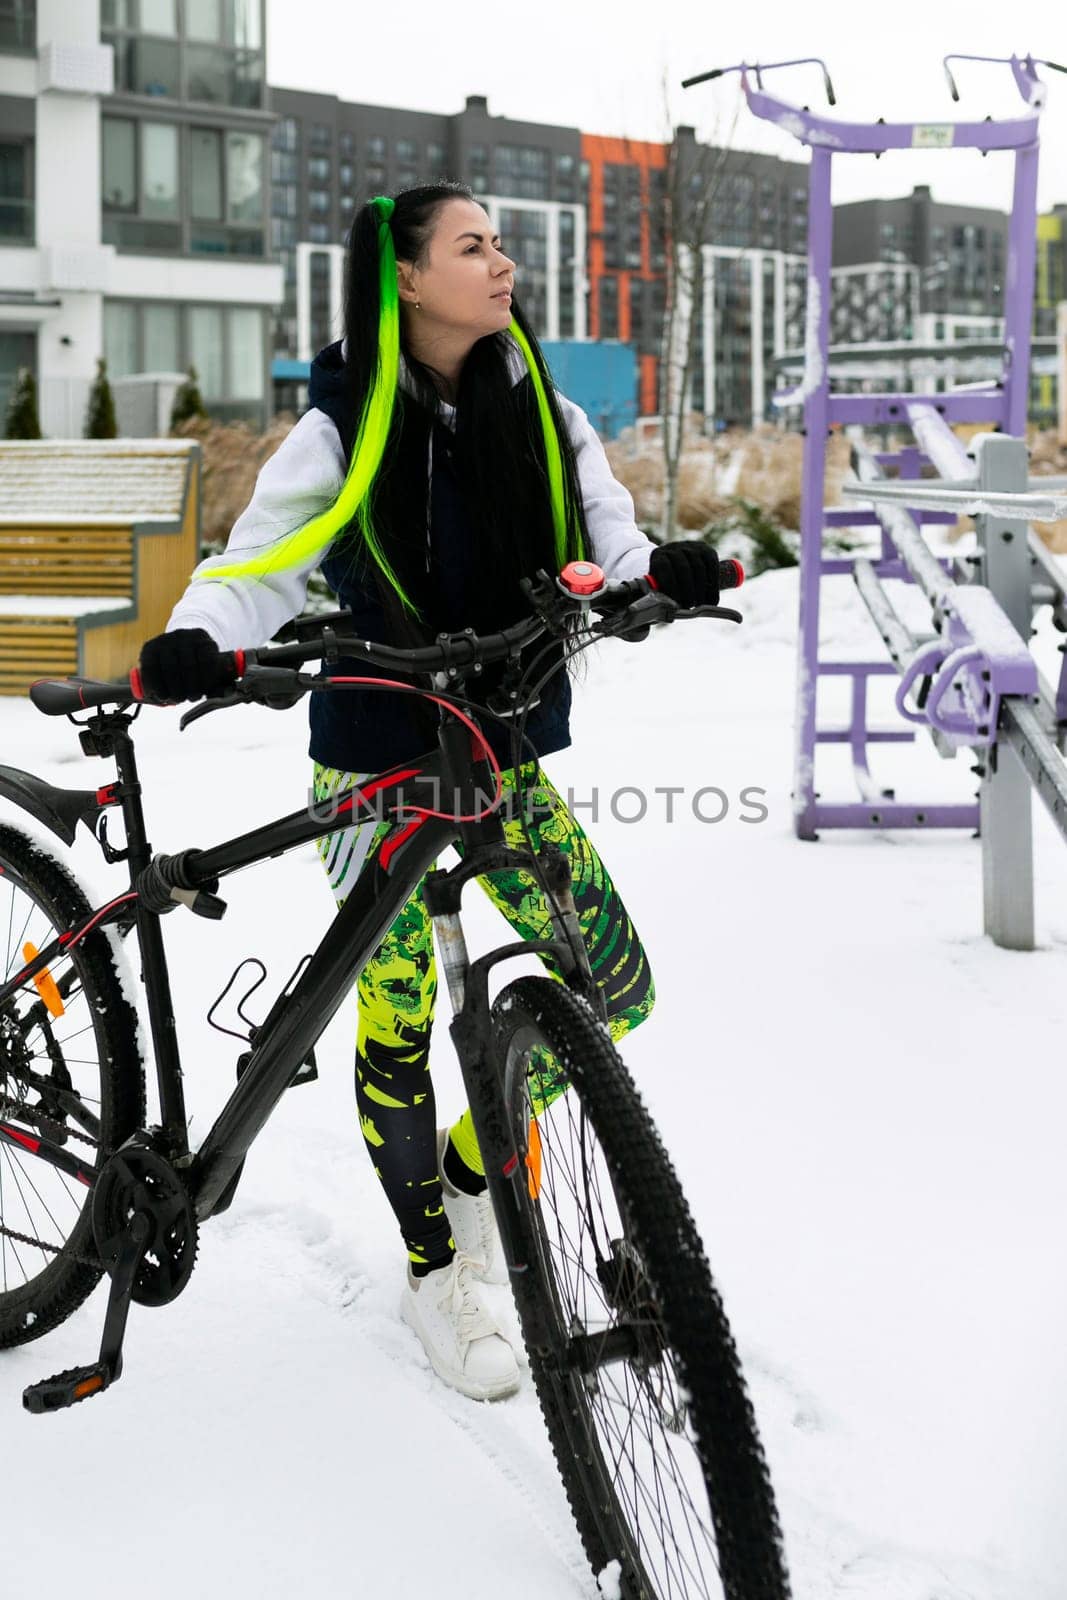 A woman wearing winter clothes is standing next to a parked bicycle in a snow-covered environment. She appears to be observing her surroundings while the bike is covered in a thin layer of snow.